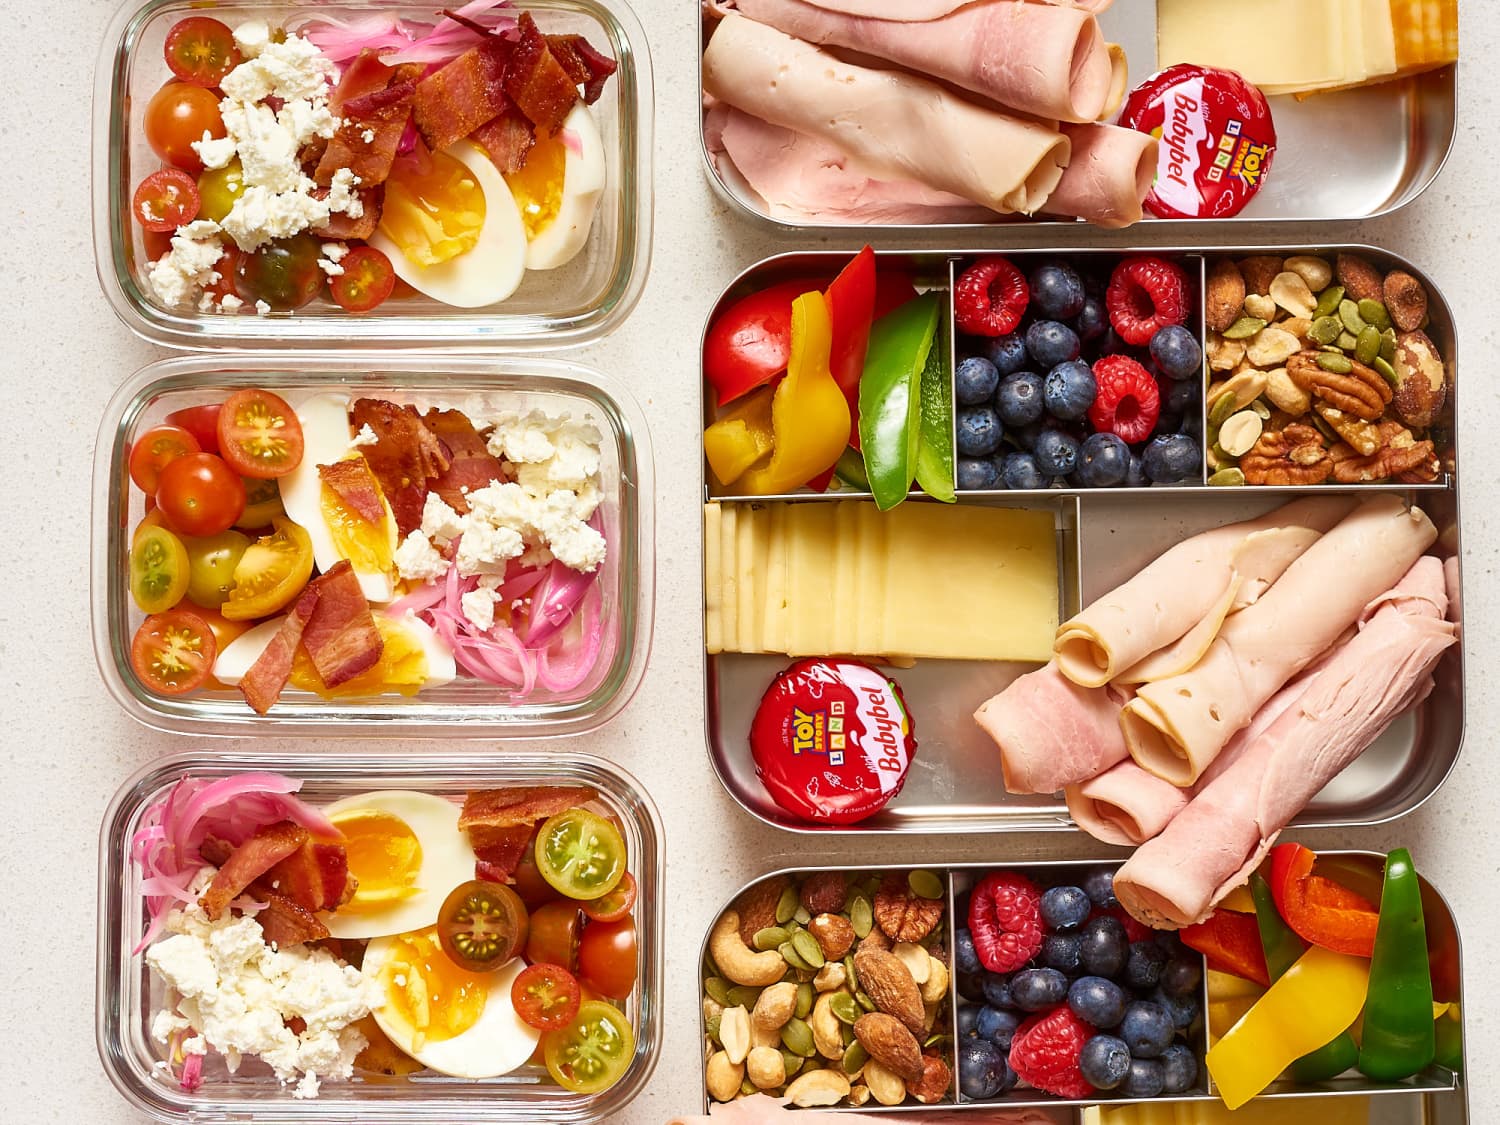 Your Guide to Healthy Meal Prep